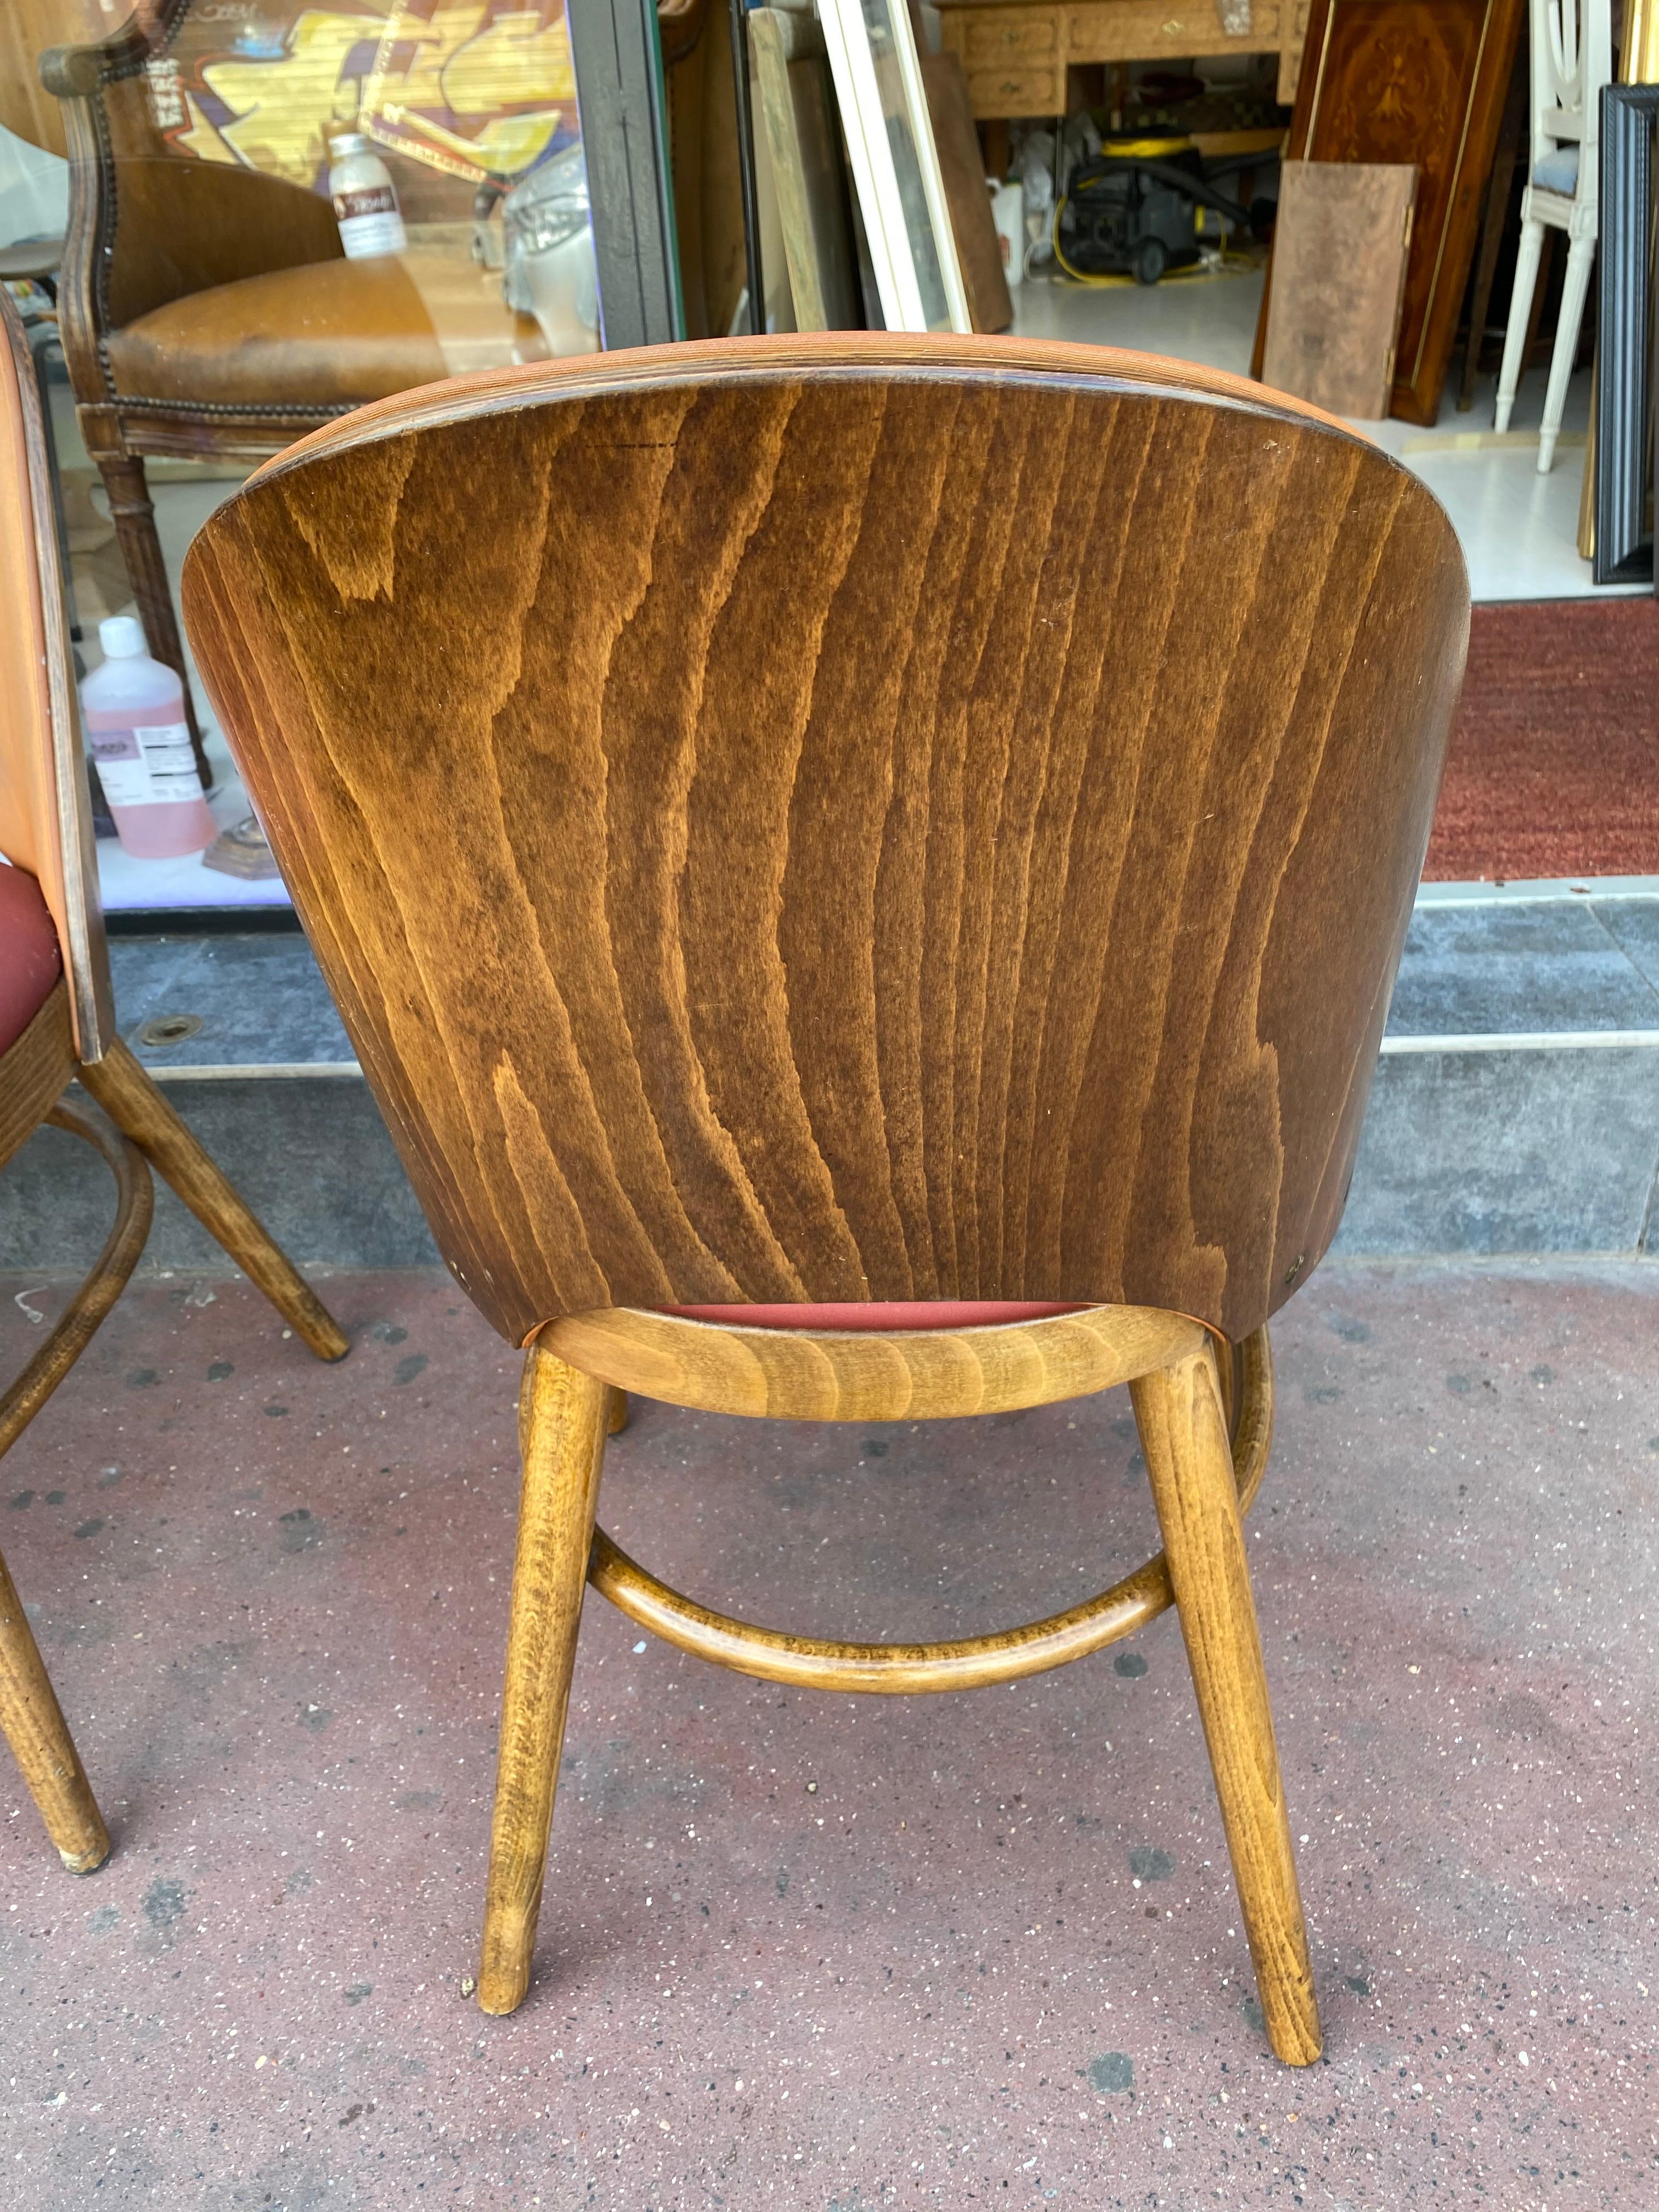 Nice series of 6 Tonneau chairs
Beech and moleskin bicolor
Very beautiful quality of French manufacture
circa 1950.
Measures: 81 H x 46 D x 44 L x seat 47 cms
1800 euros the series of 6 chairs.